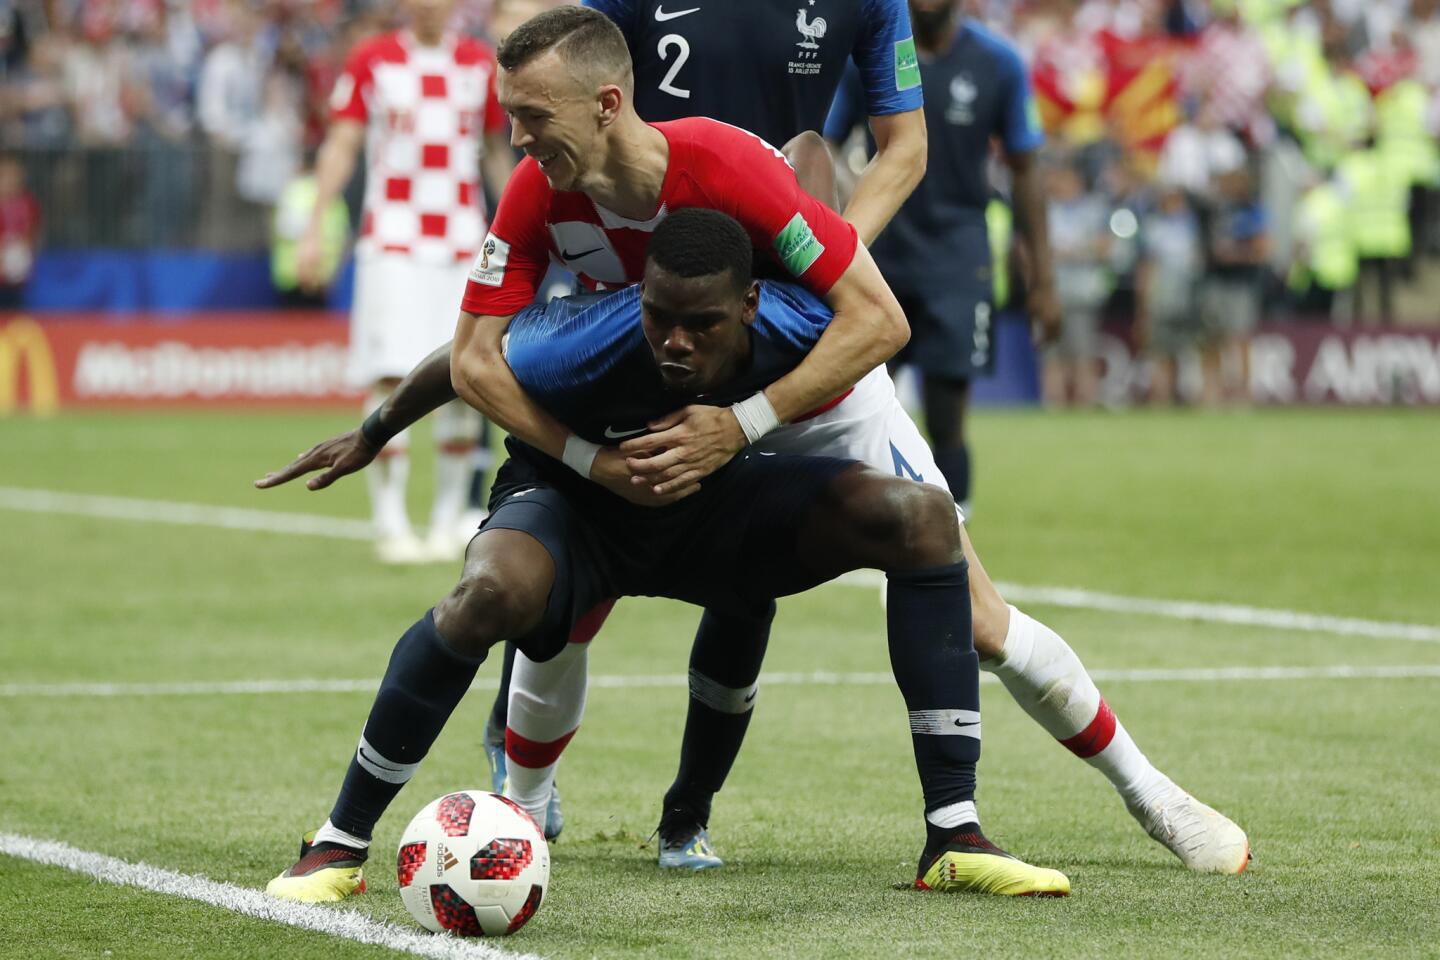 Croatia's Ivan Perisic and France's Paul Pogba battle for the ball during the final match between France and Croatia at the 2018 soccer World Cup in the Luzhniki Stadium in Moscow, Russia, Sunday, July 15, 2018.